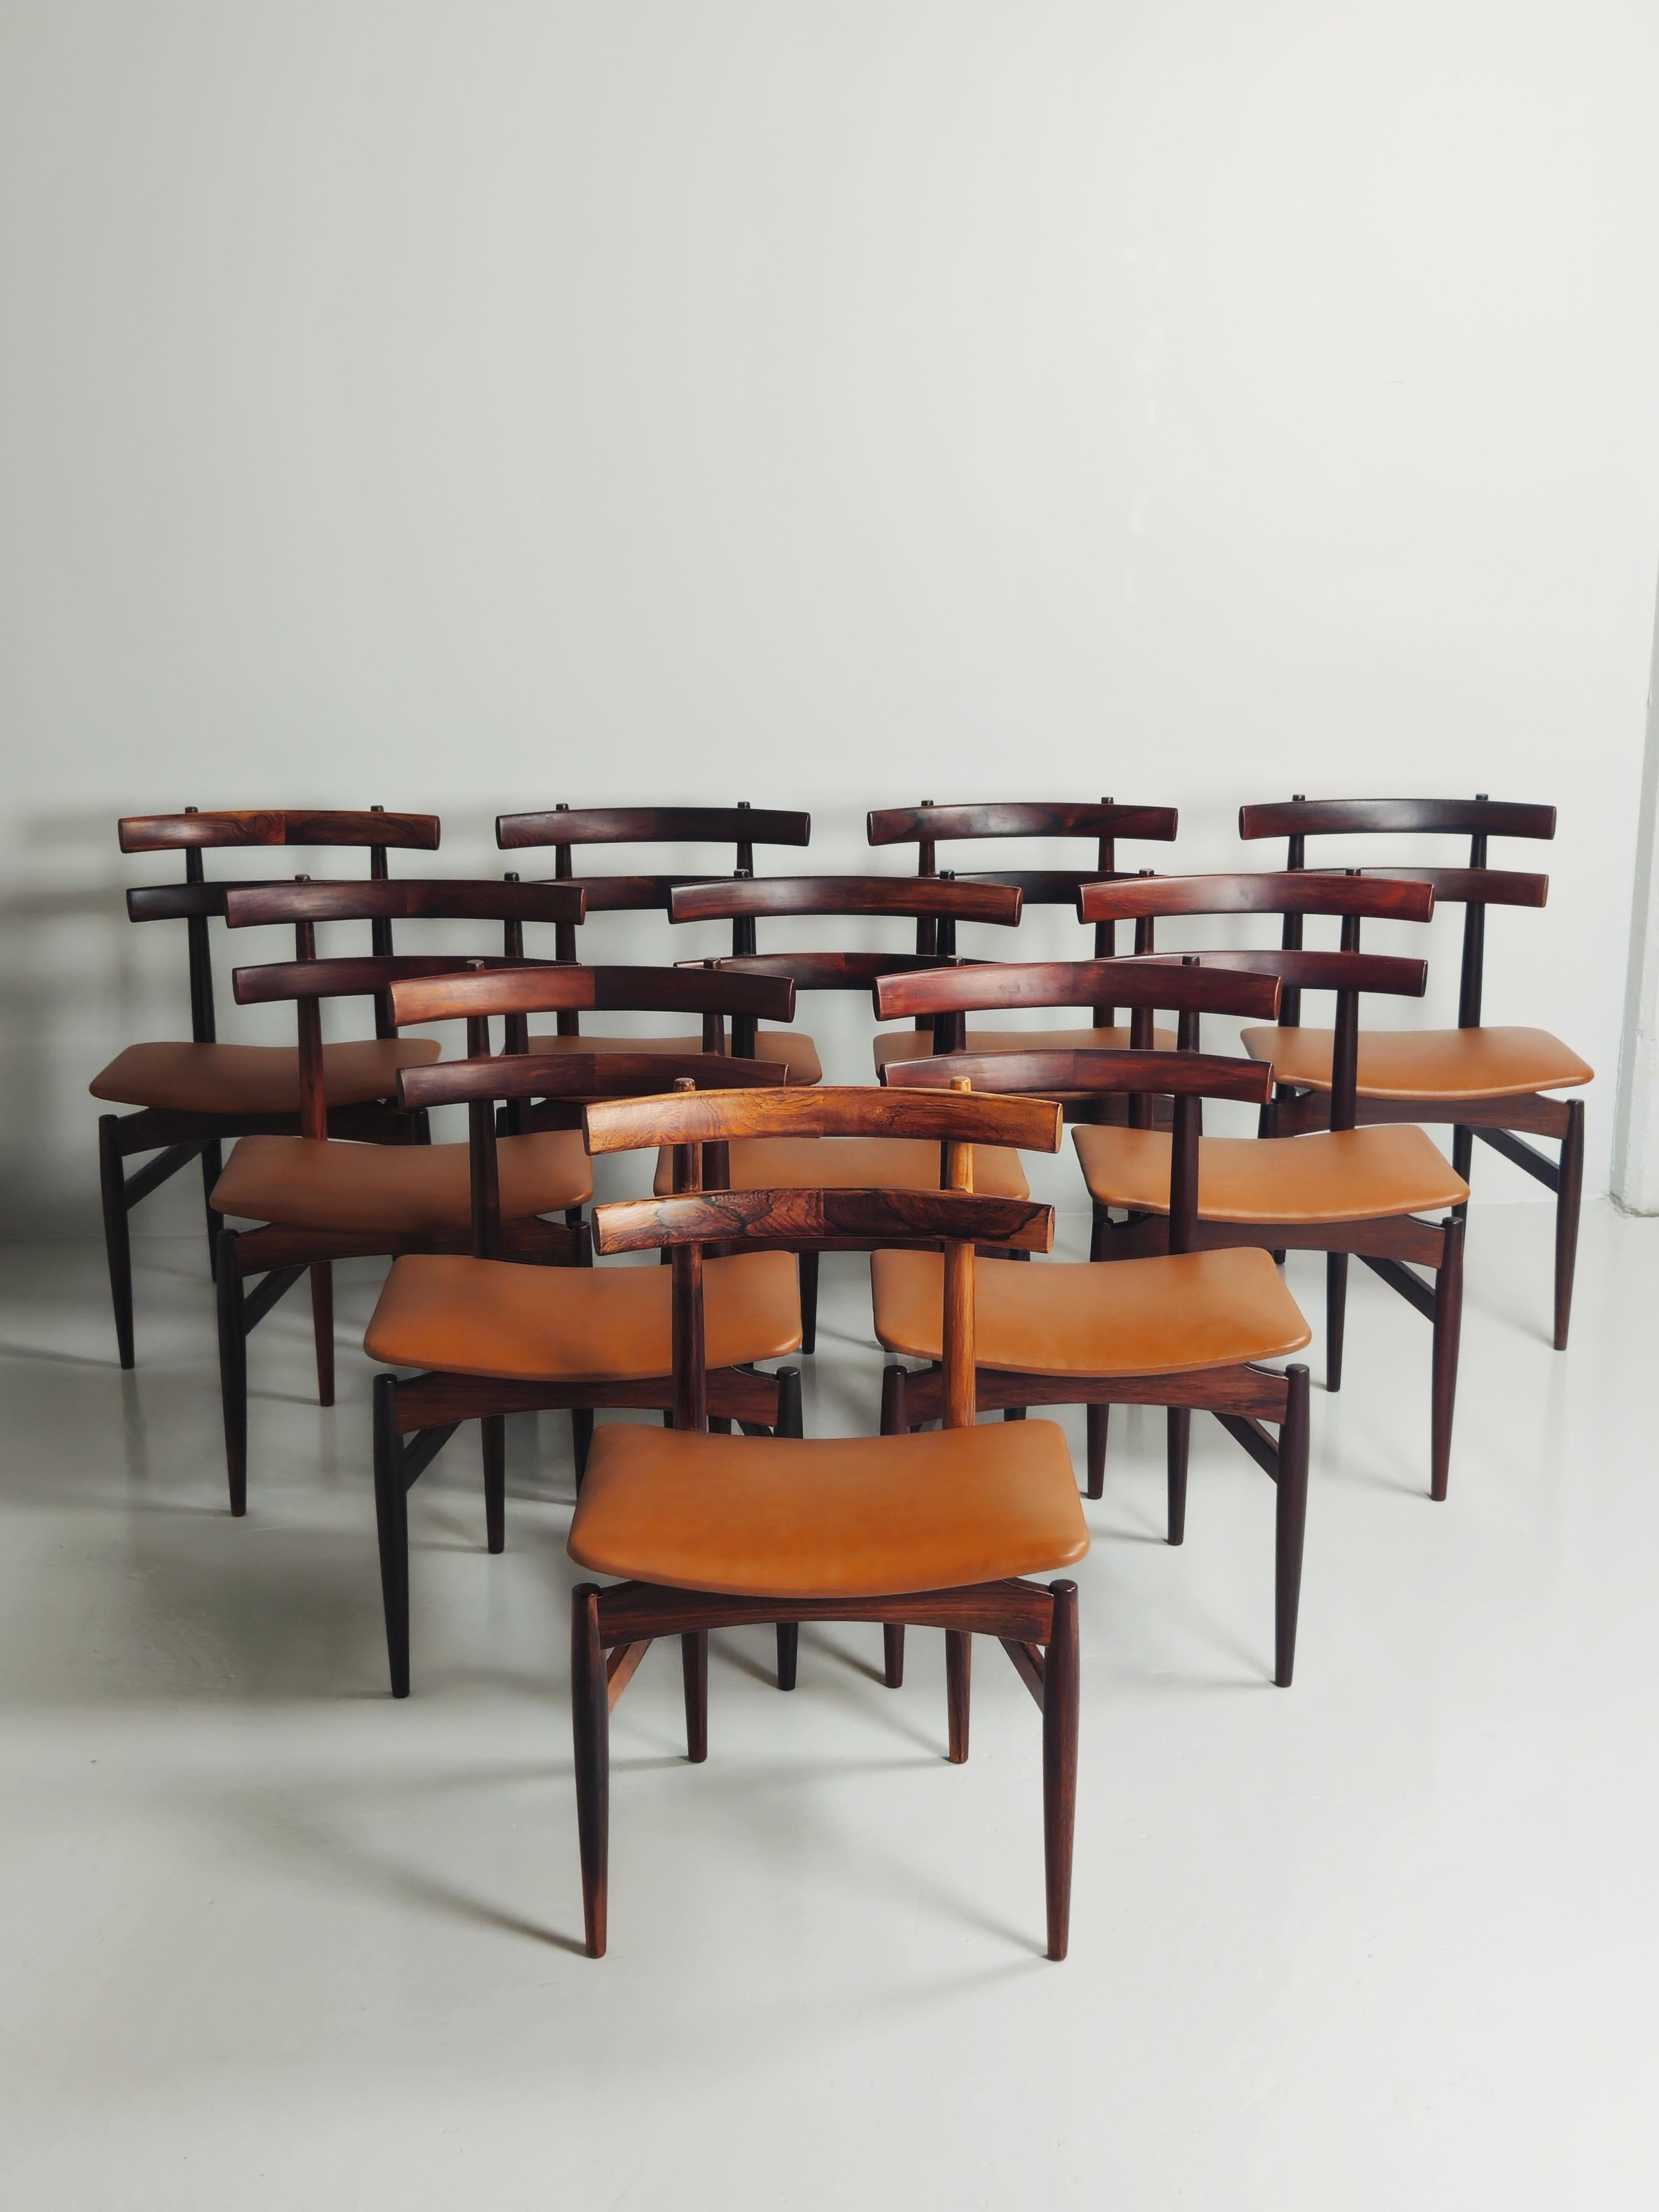 Very rare dining chair designed by Poul Hundevad in Denmark during the 1950s. 

Made in rosewood with seats upholstered in high quality cognac leather.

Eleven chairs available. 